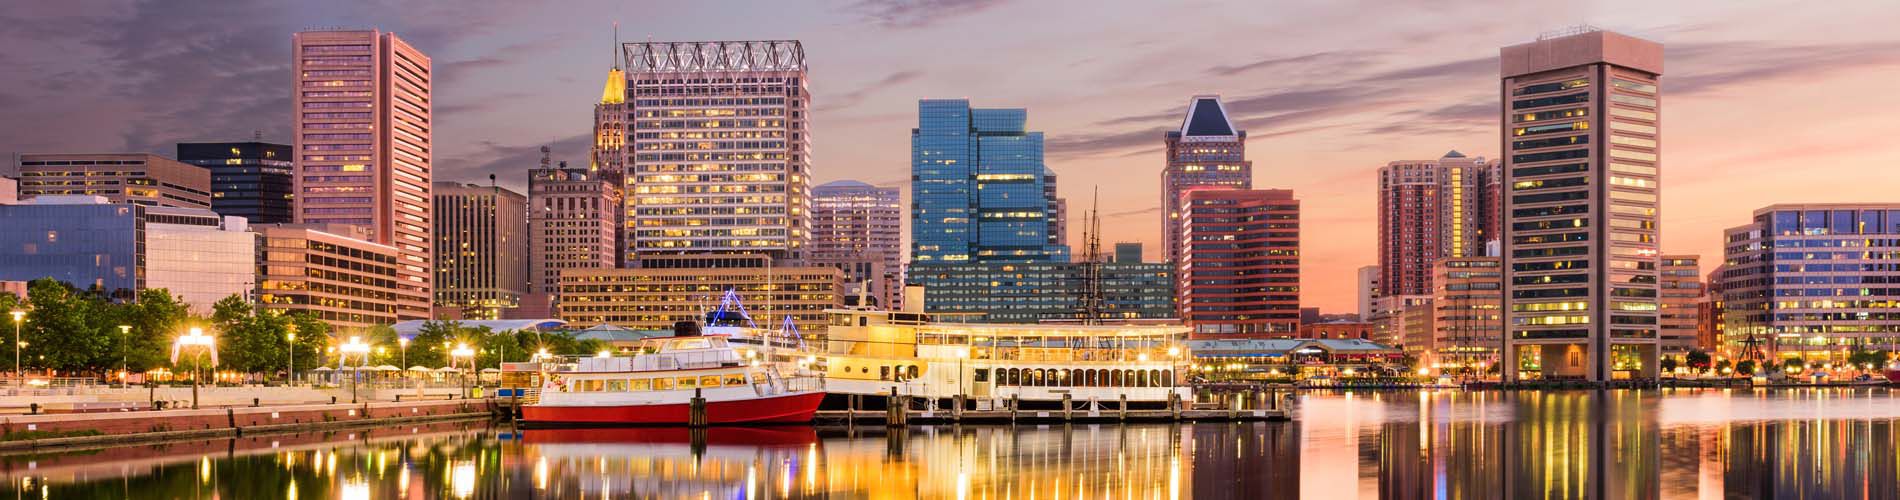 A skyline image of Downtown Baltimore.